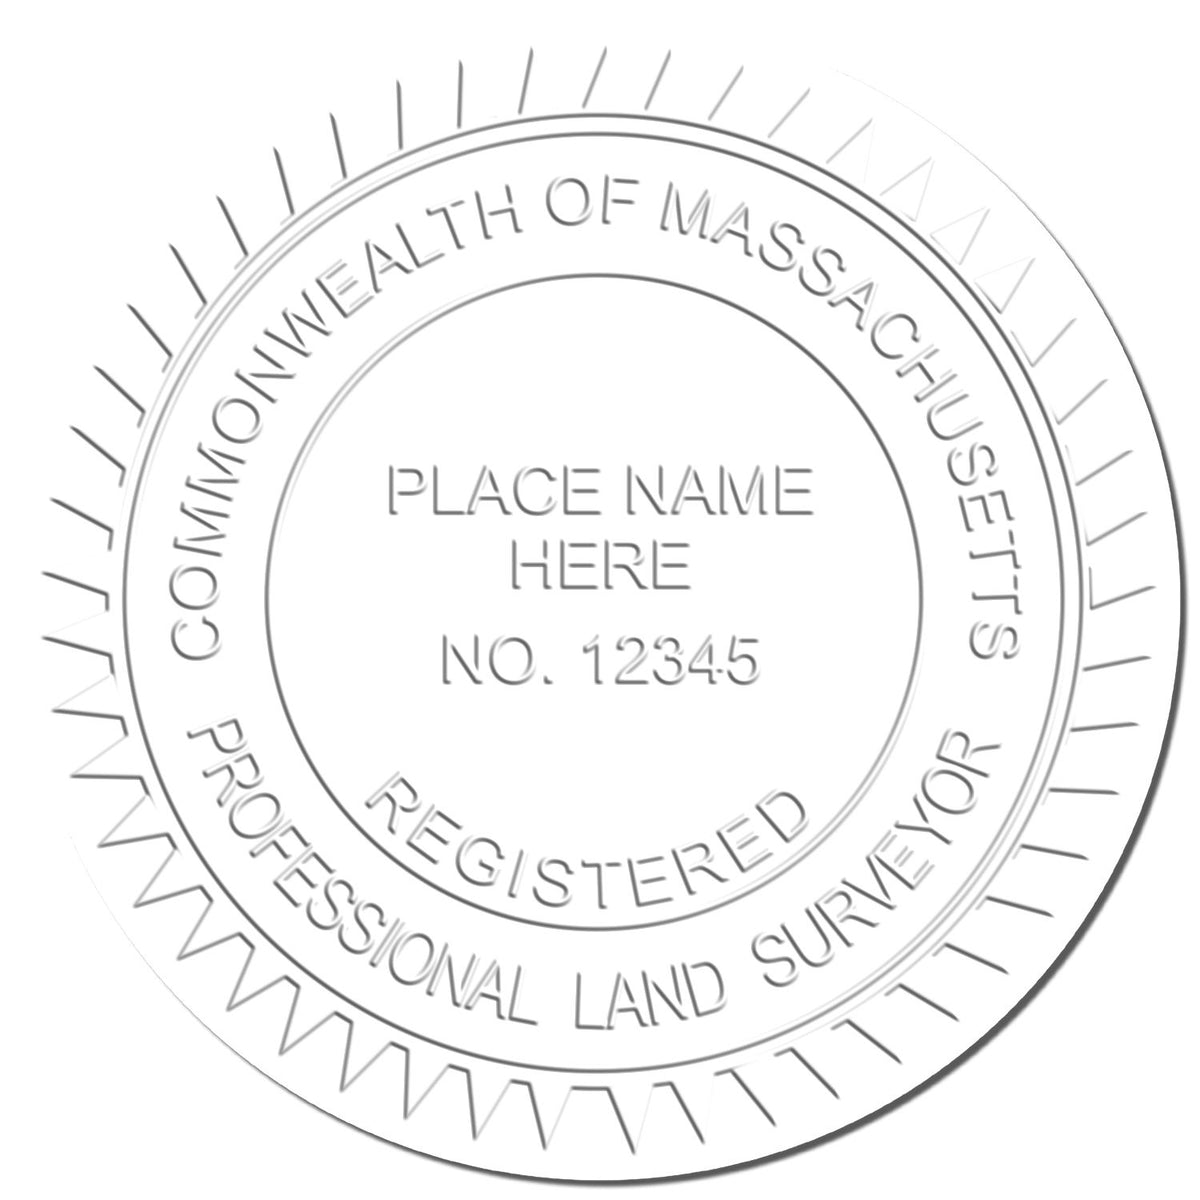 This paper is stamped with a sample imprint of the Gift Massachusetts Land Surveyor Seal, signifying its quality and reliability.